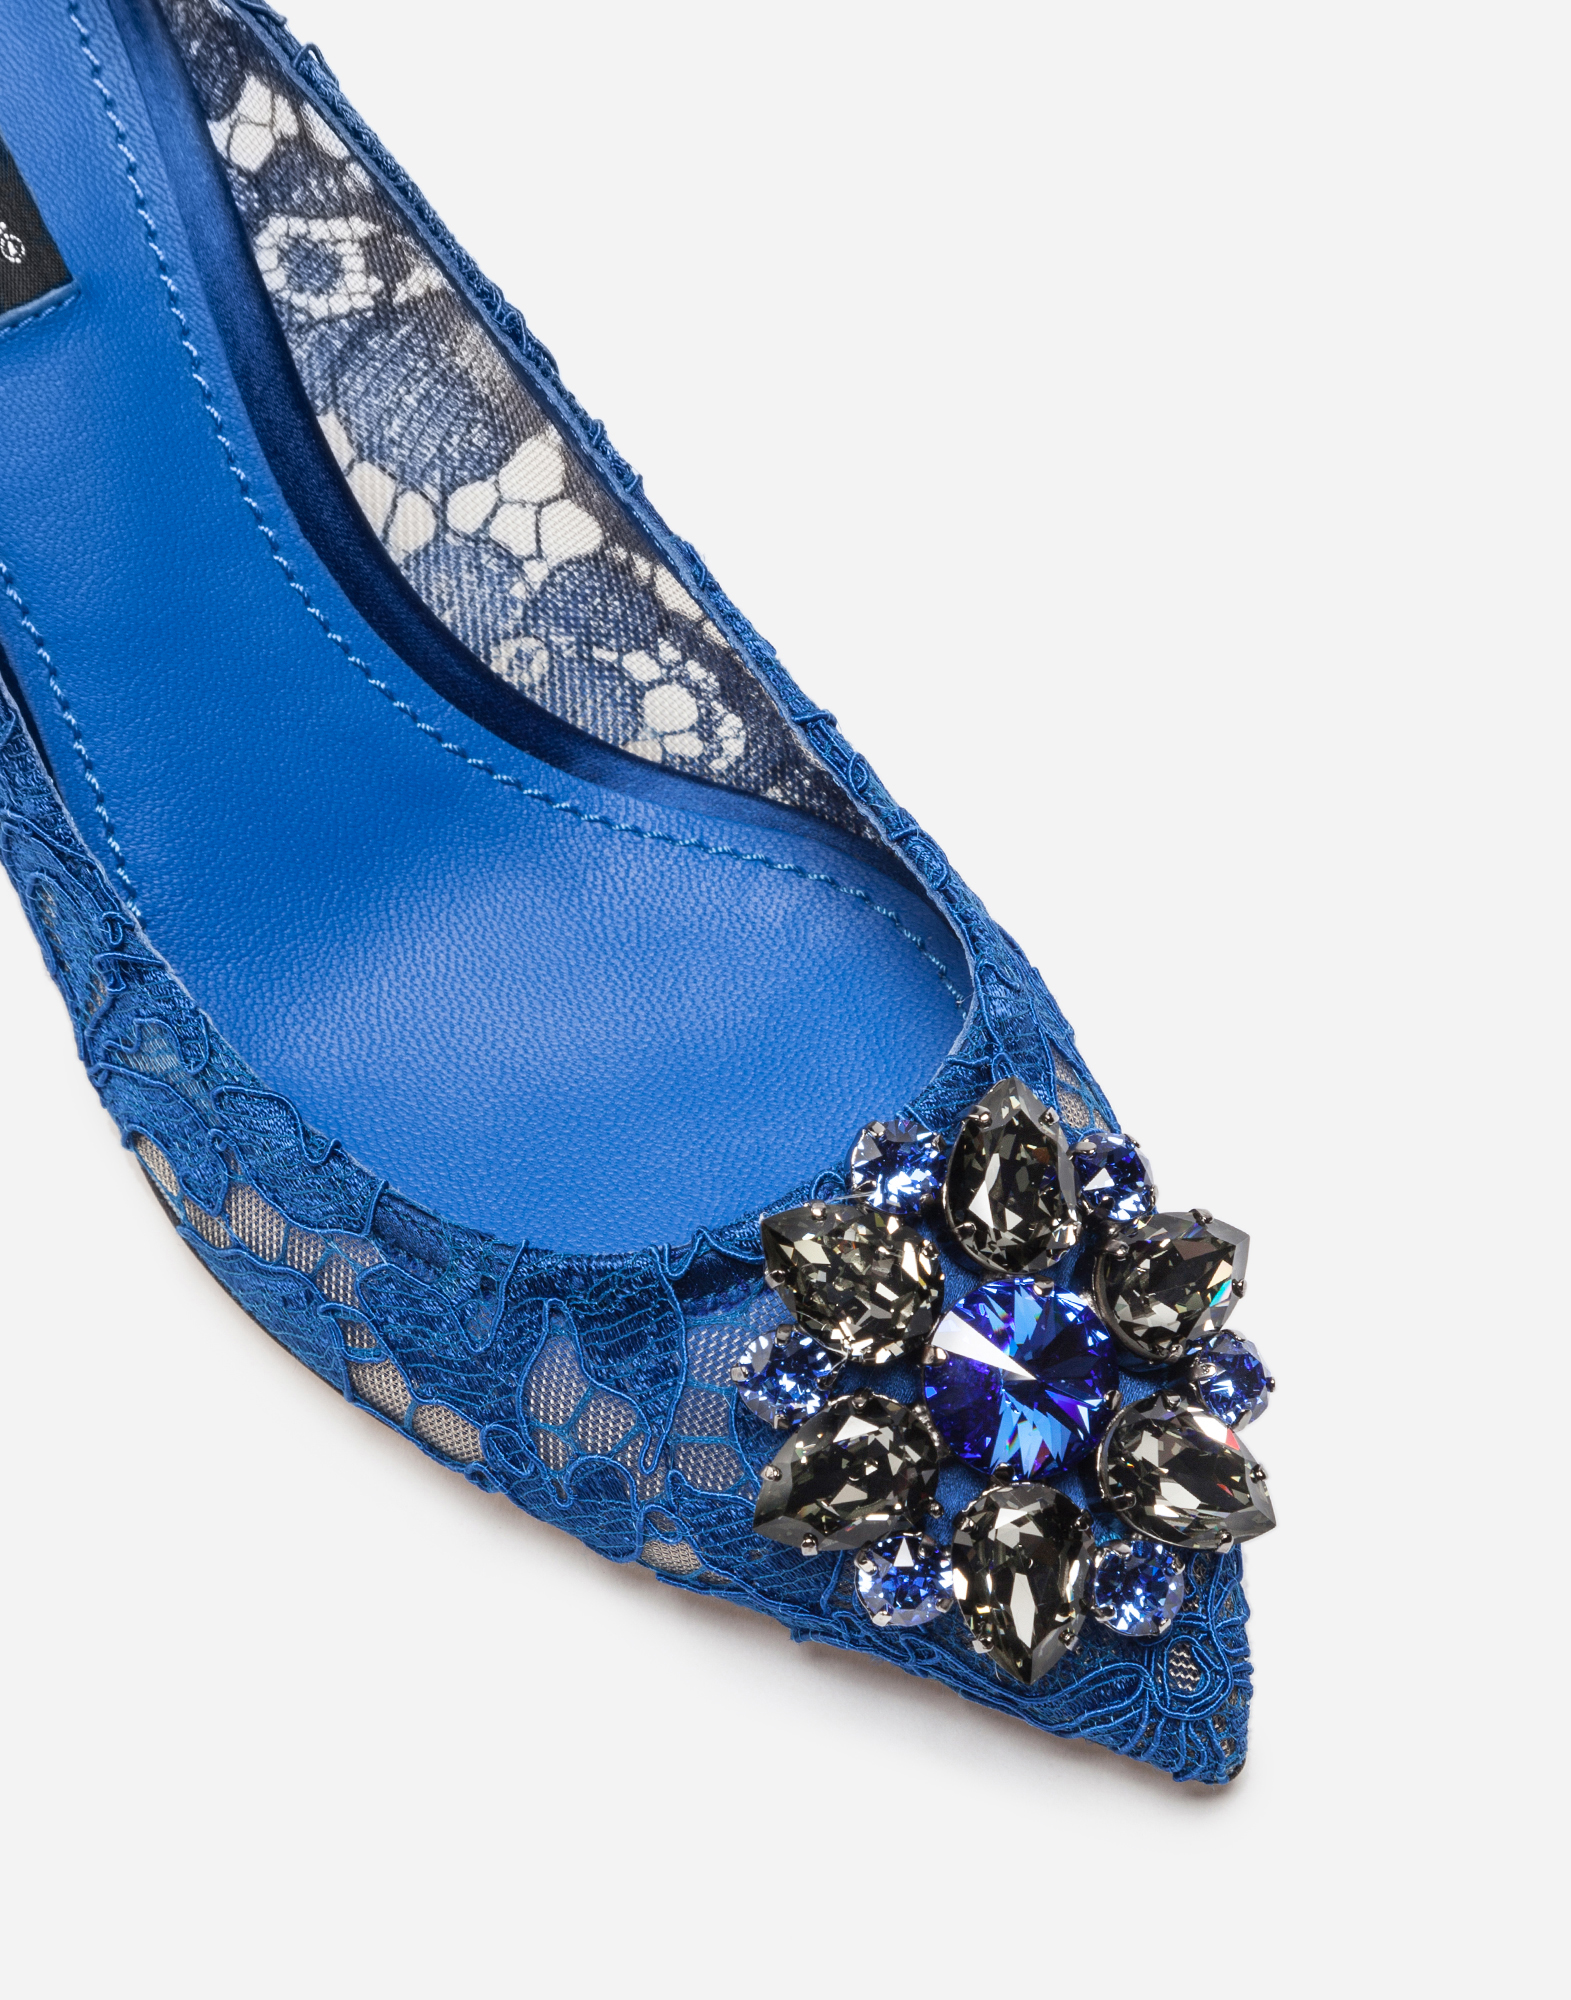 Shop Dolce & Gabbana Lace Rainbow Pumps With Brooch Detailing In Blue